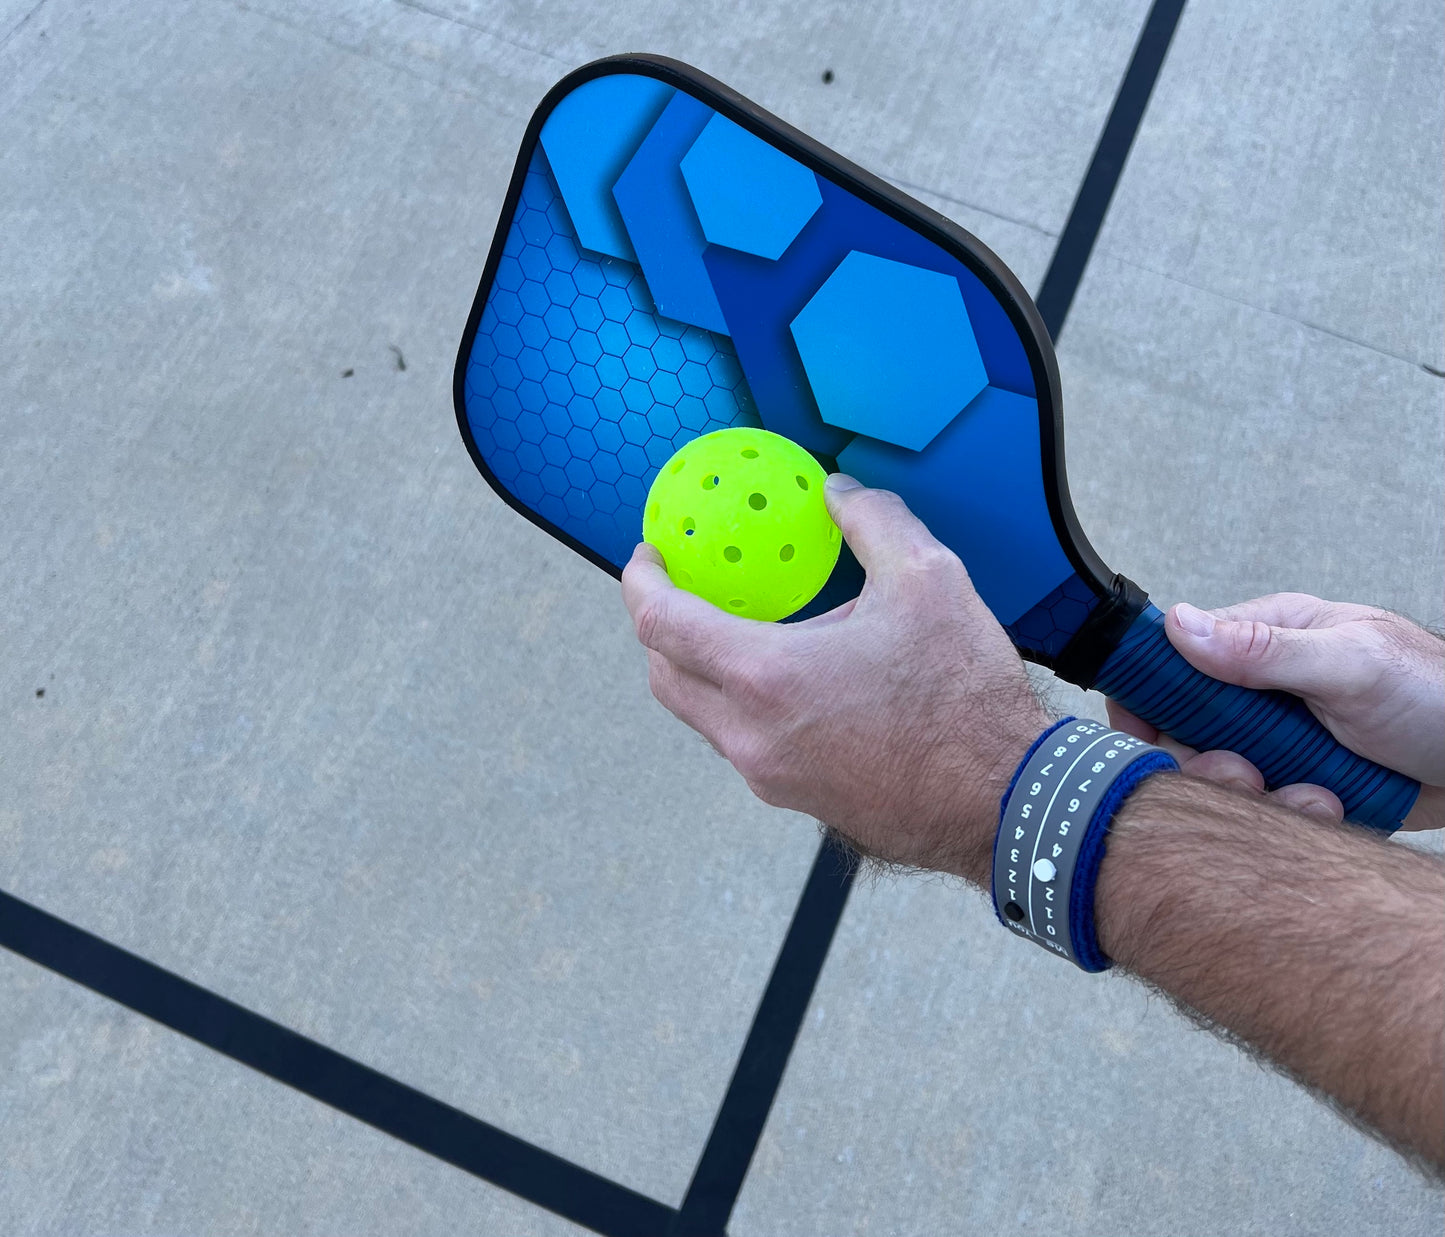 Pickleball Point Bands are the best pickleball scorekeeper, scoring band and scoreband worn on your wrist to keep score and track the server number while playing pickleball